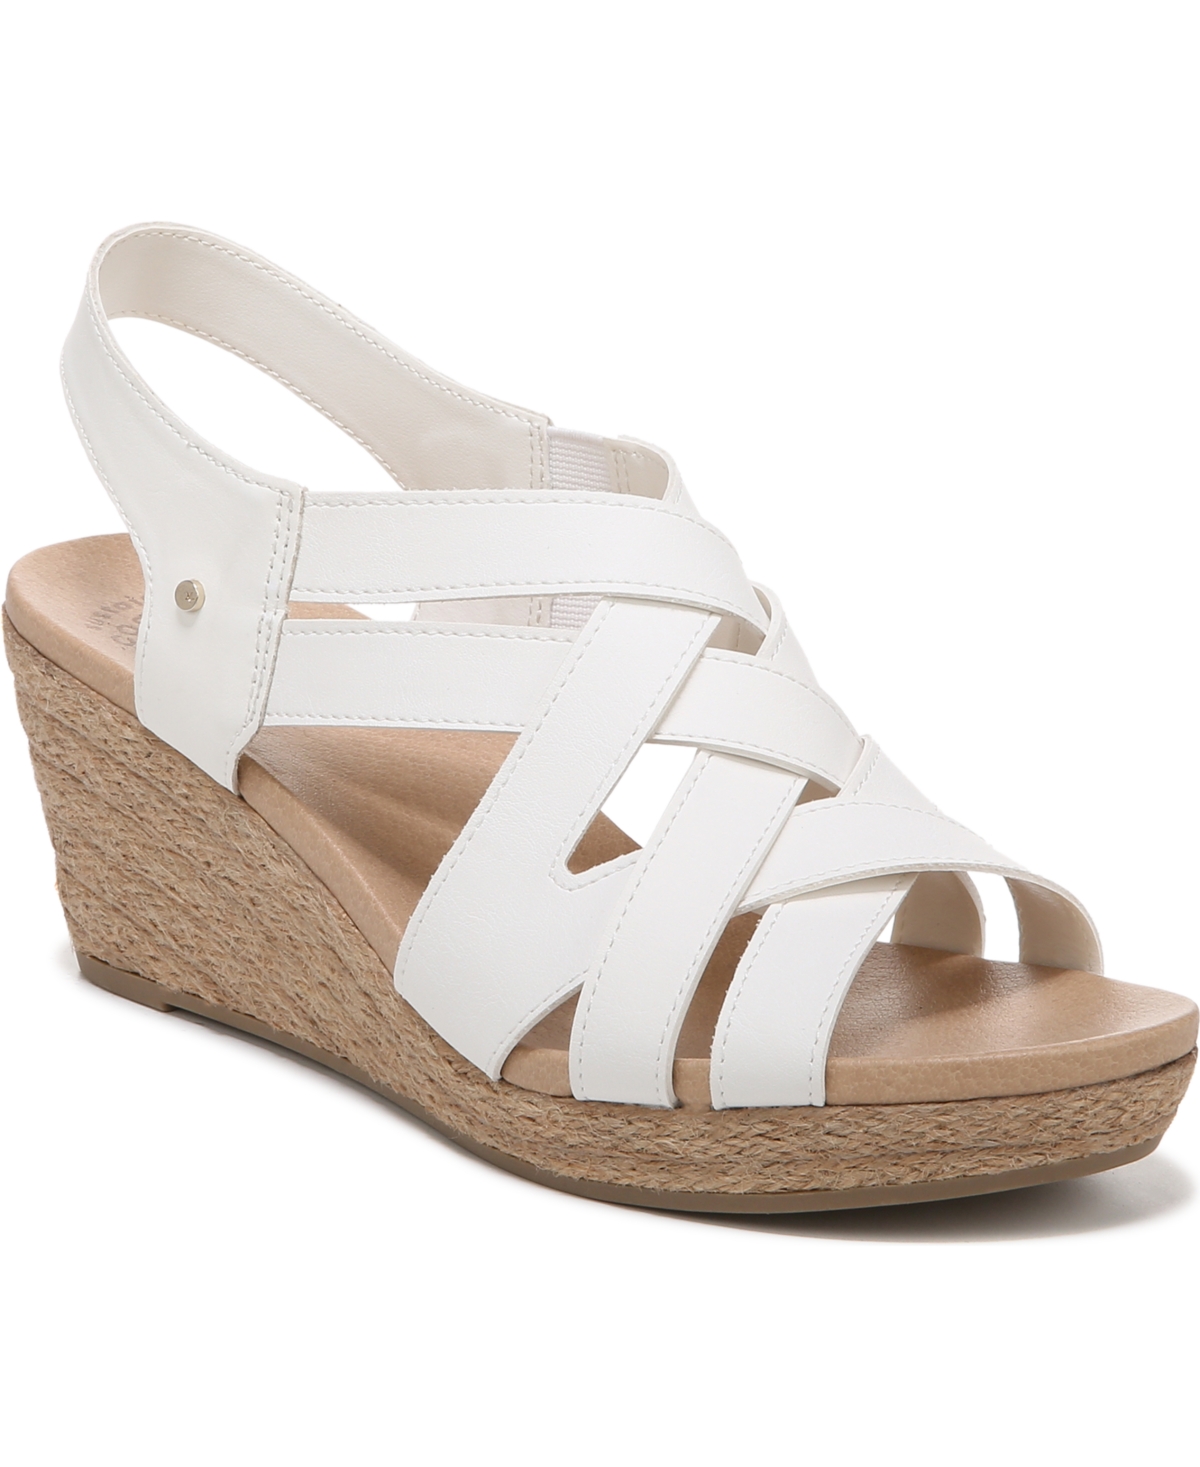 Women's Everlasting Ankle Strap Sandals - Sand Faux Leather